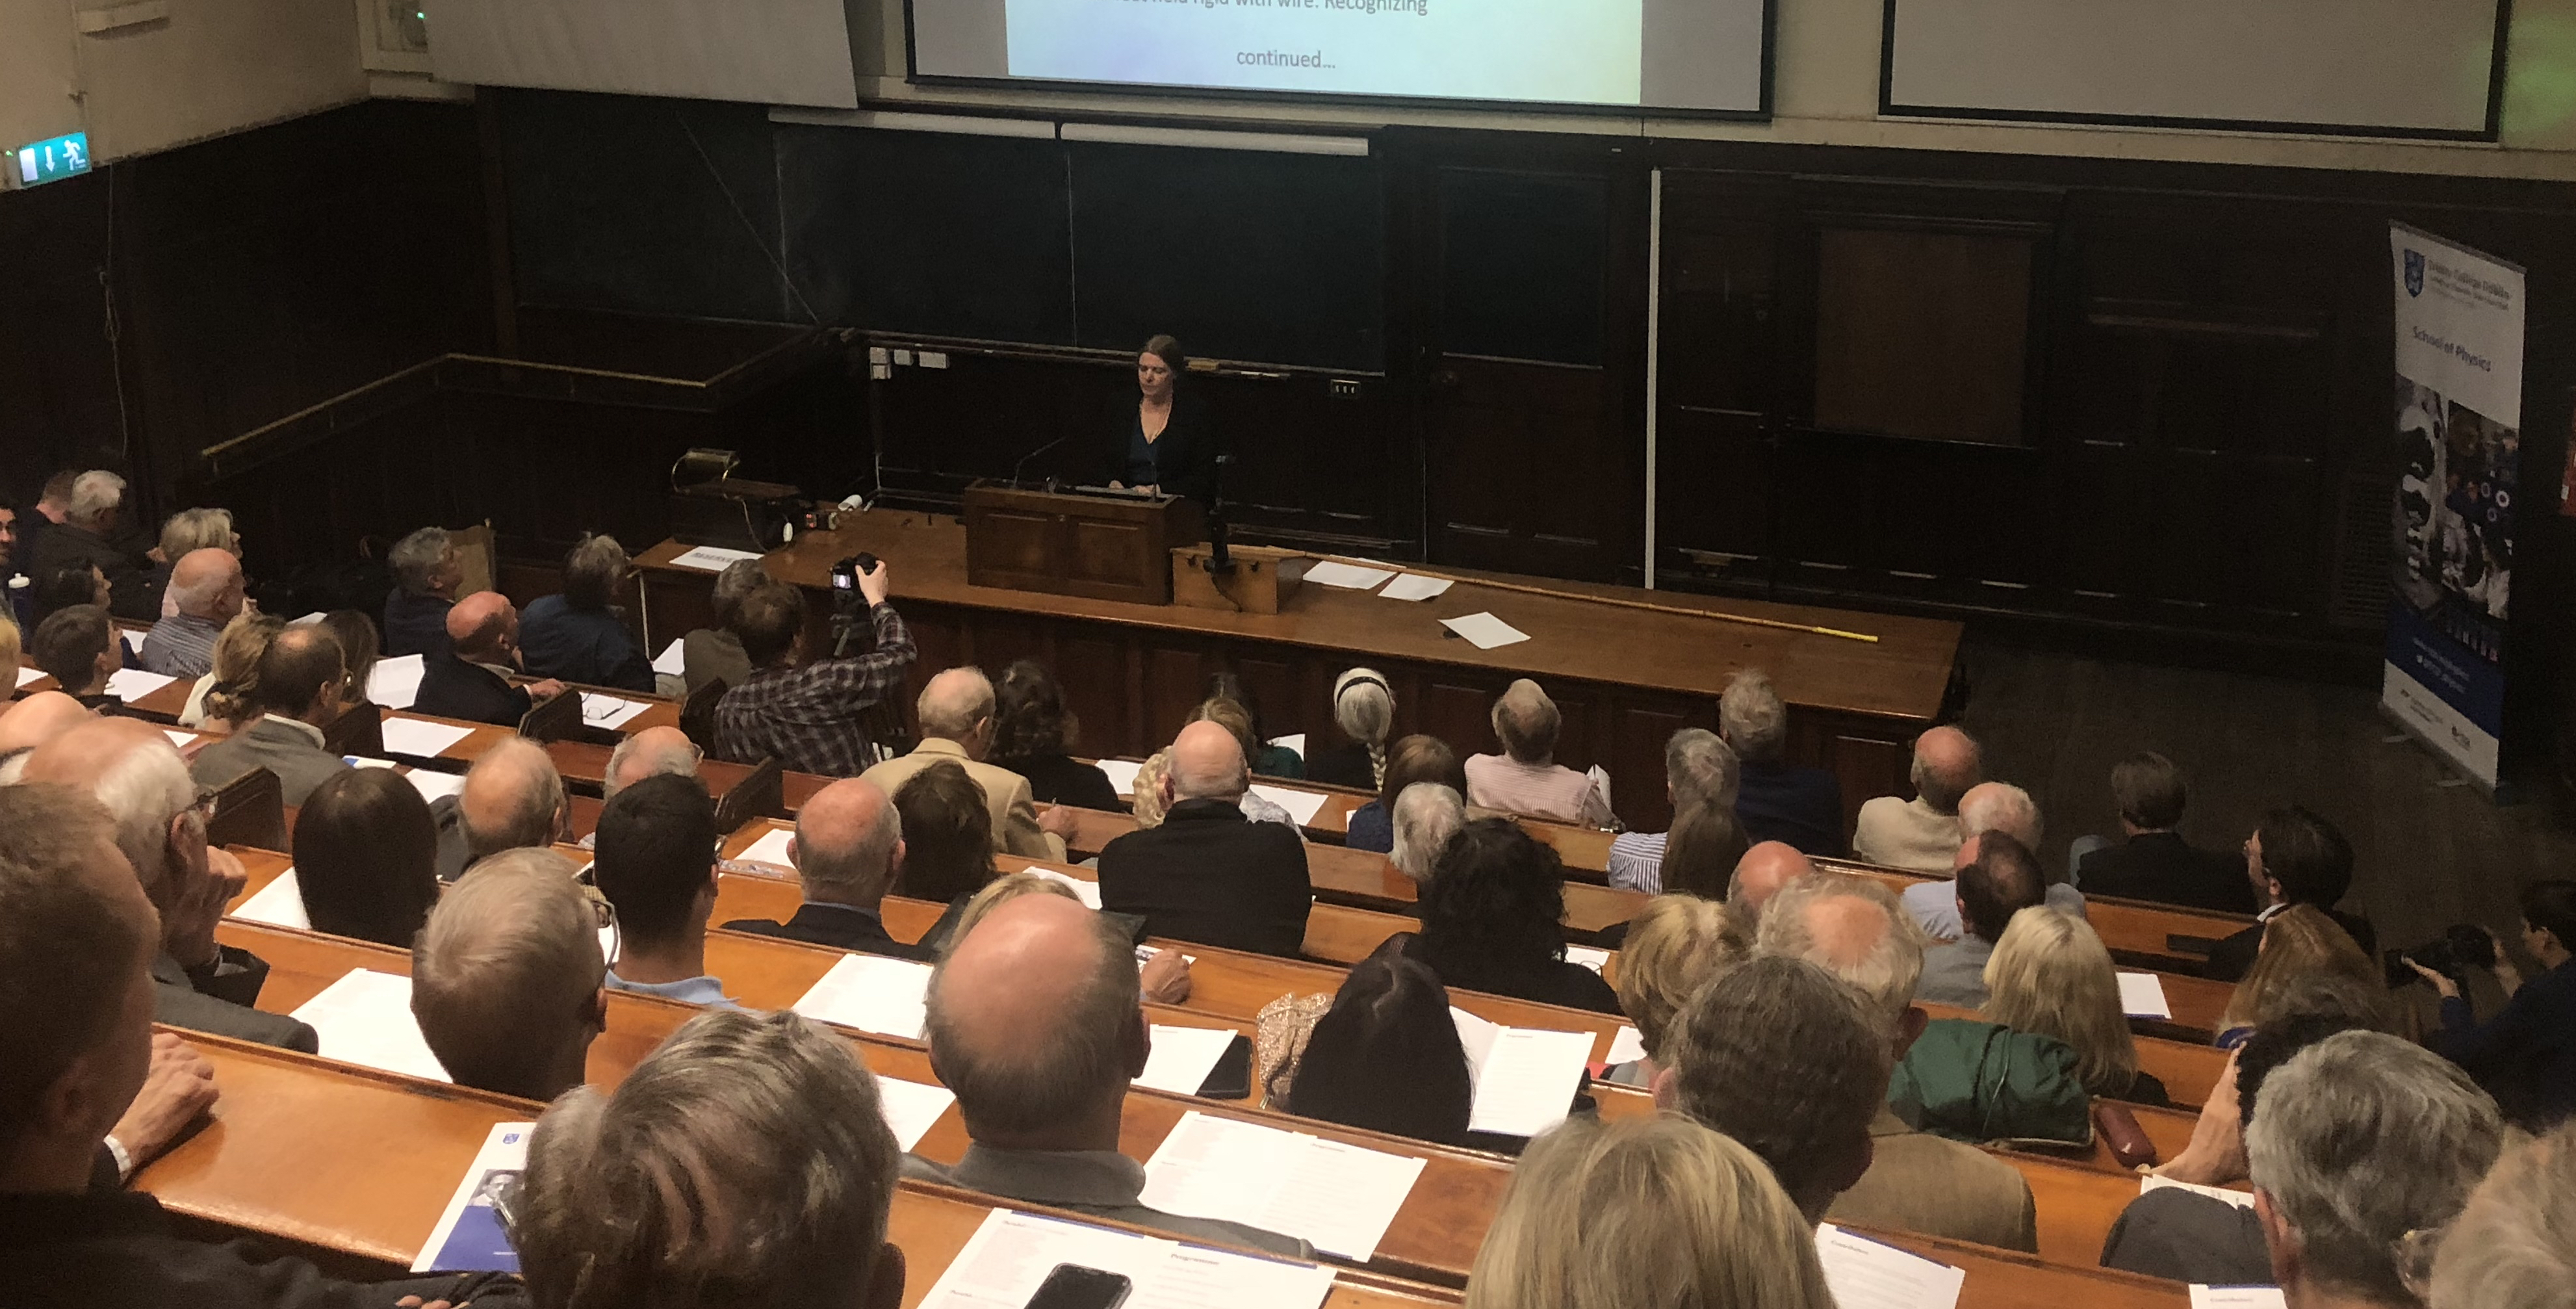 Jane reading at What is Life Conference TCD